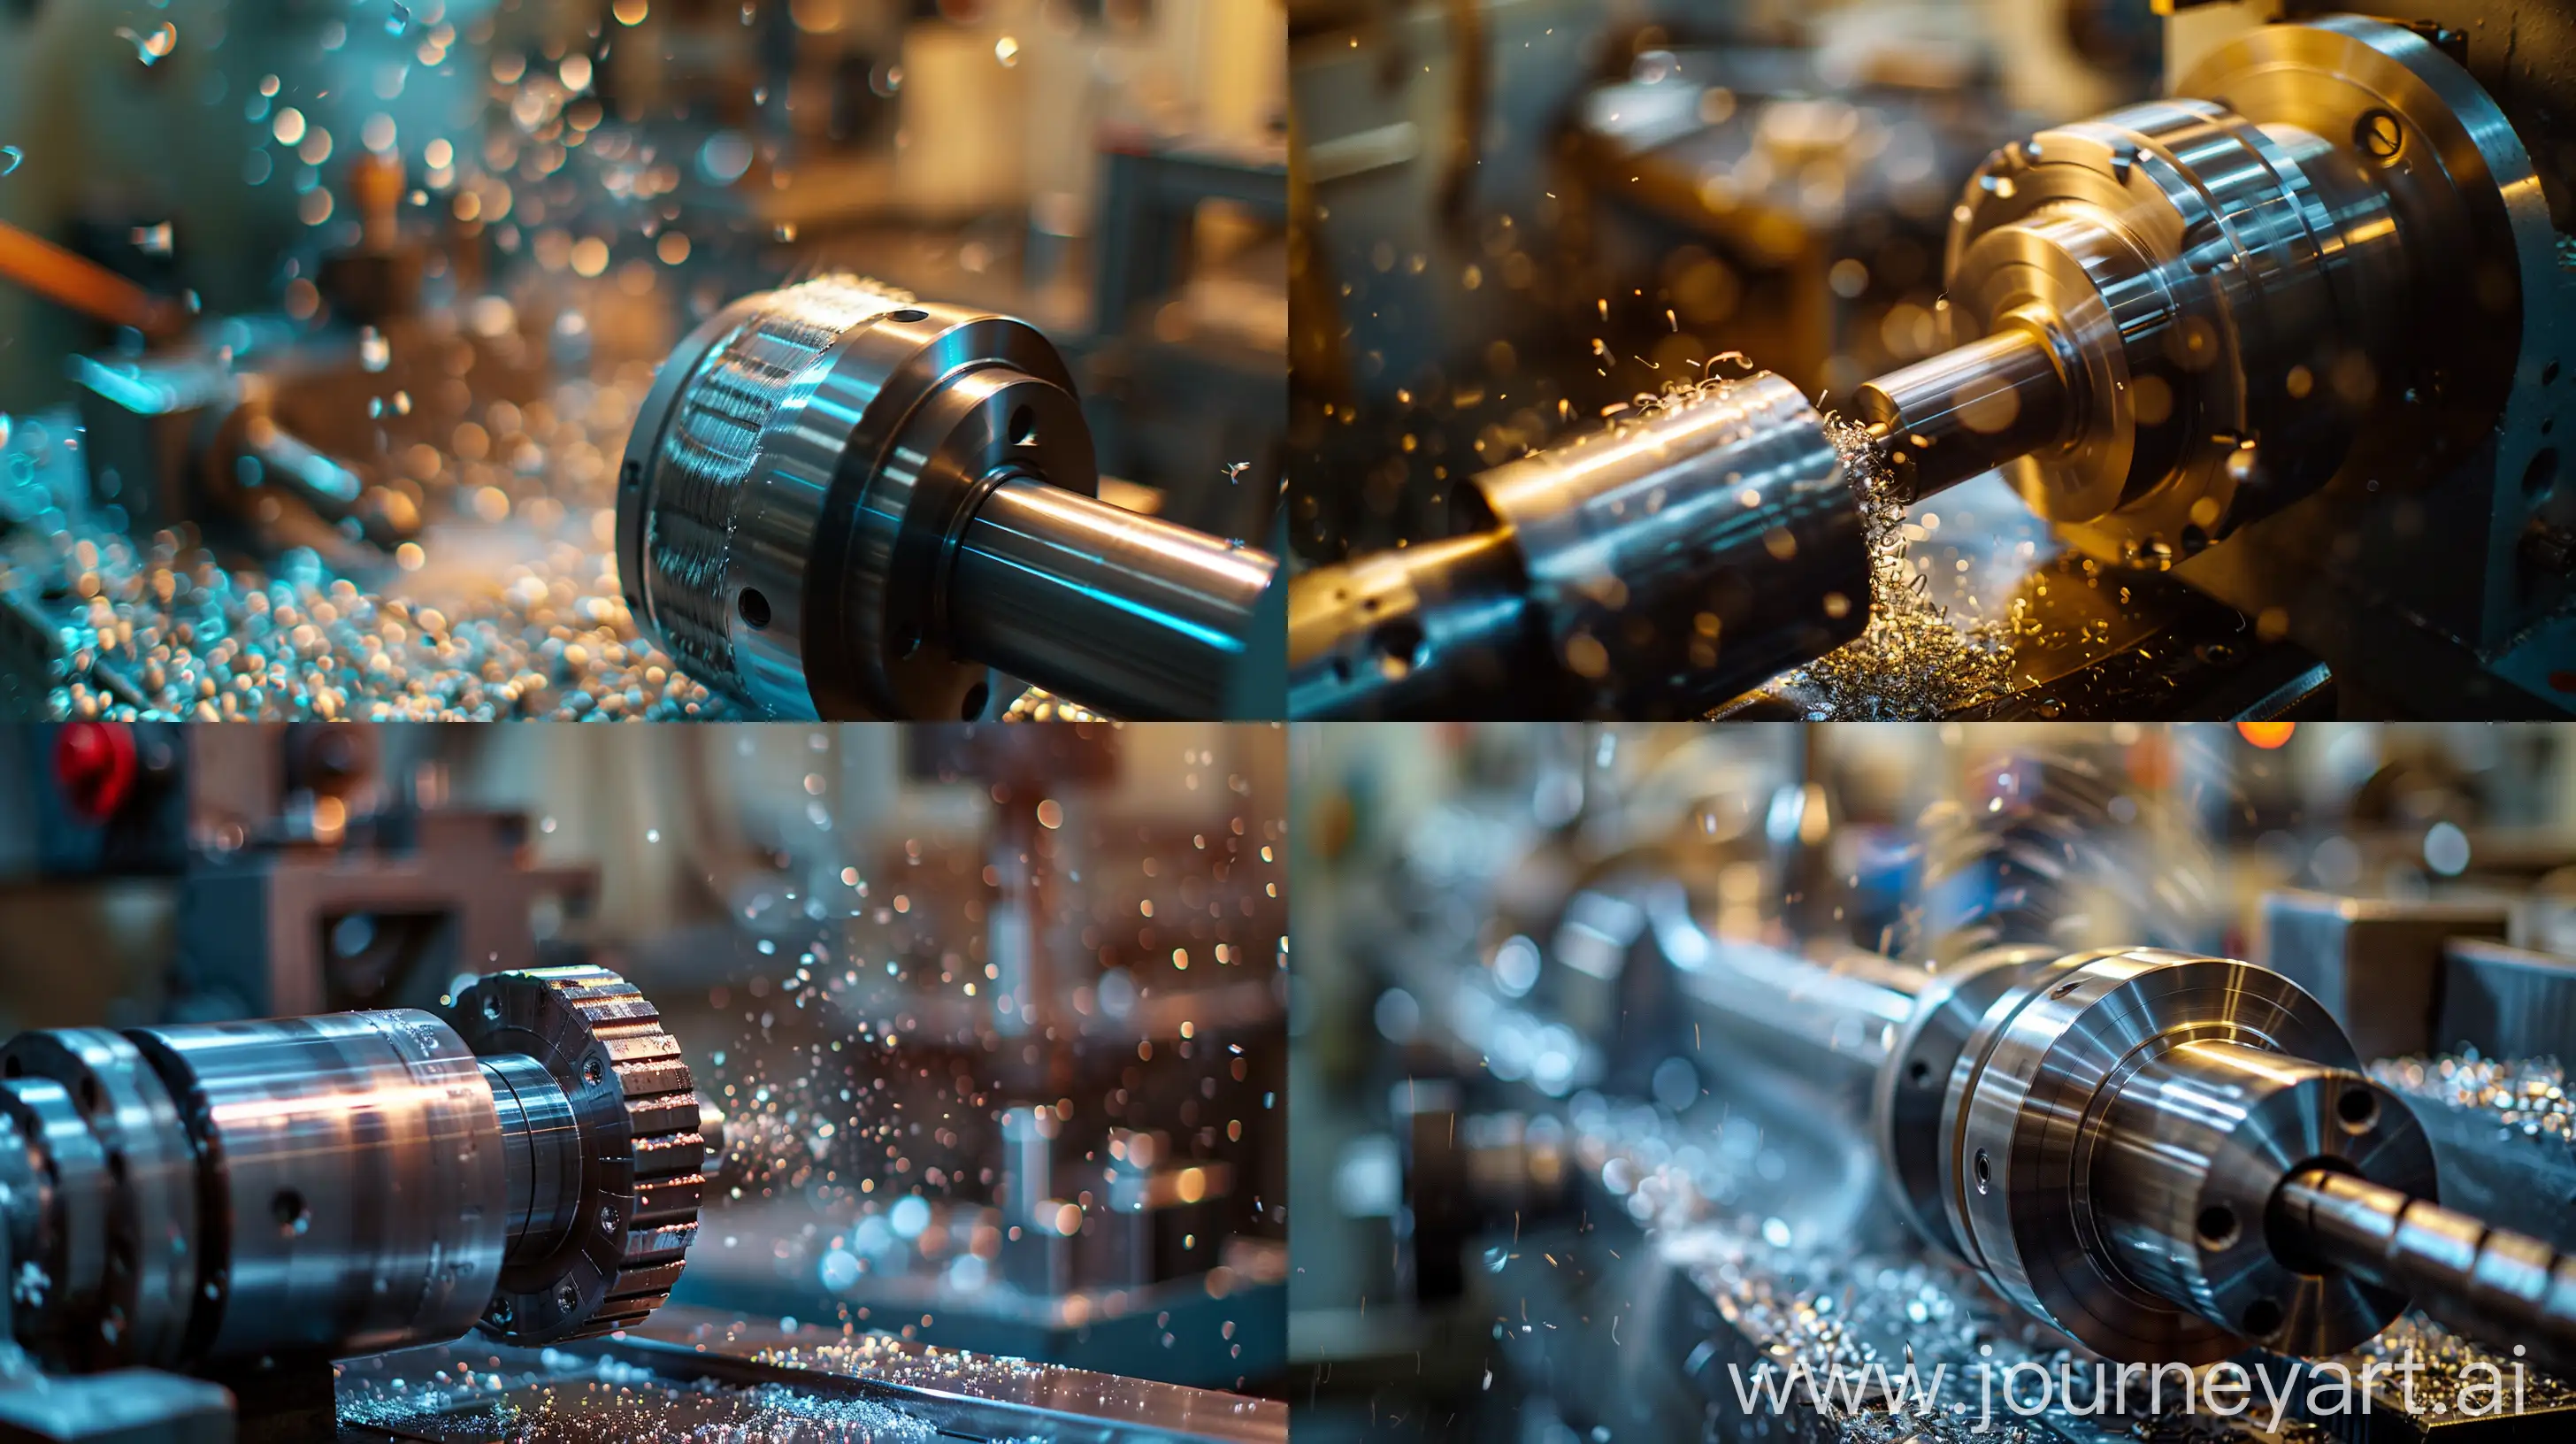 /imagine prompt: A high-definition photograph of a CNC lathe machine turning a piece of aluminum, precision engineering, close-up view, metallic sheen, industrial background with blurred tools and workbenches. Cool, bright lighting highlighting the metal shavings. Created Using: Canon EOS 5D, industrial photography, high shutter speed, bokeh effect, sharp focus, depth of field, vibrant colors, fine details --ar 16:9 --v 6.0